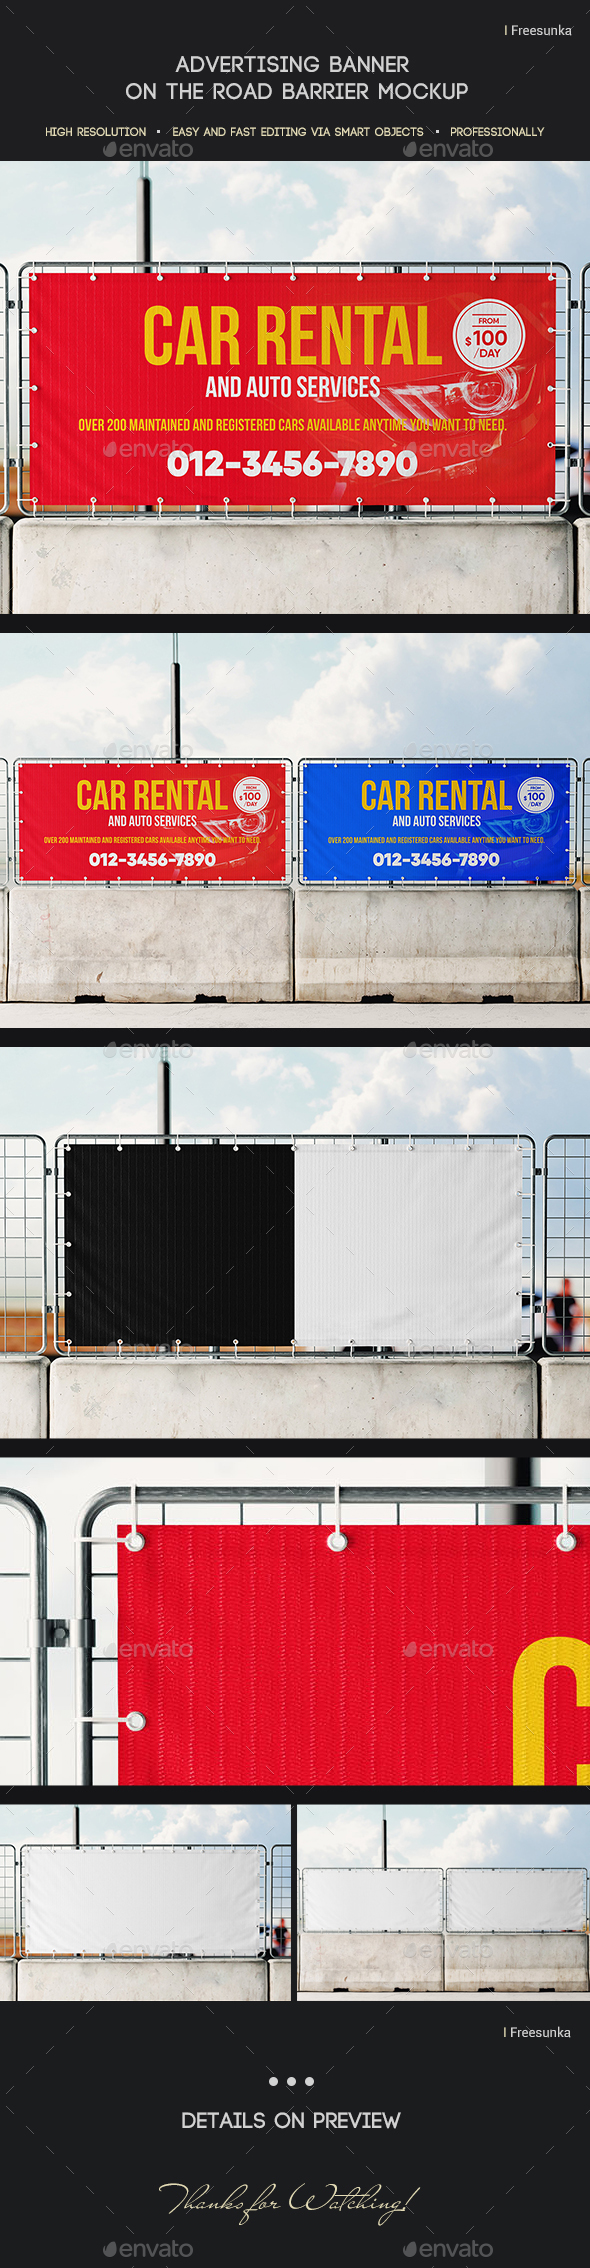 Advertising Banner on the Road Barrier Mockup